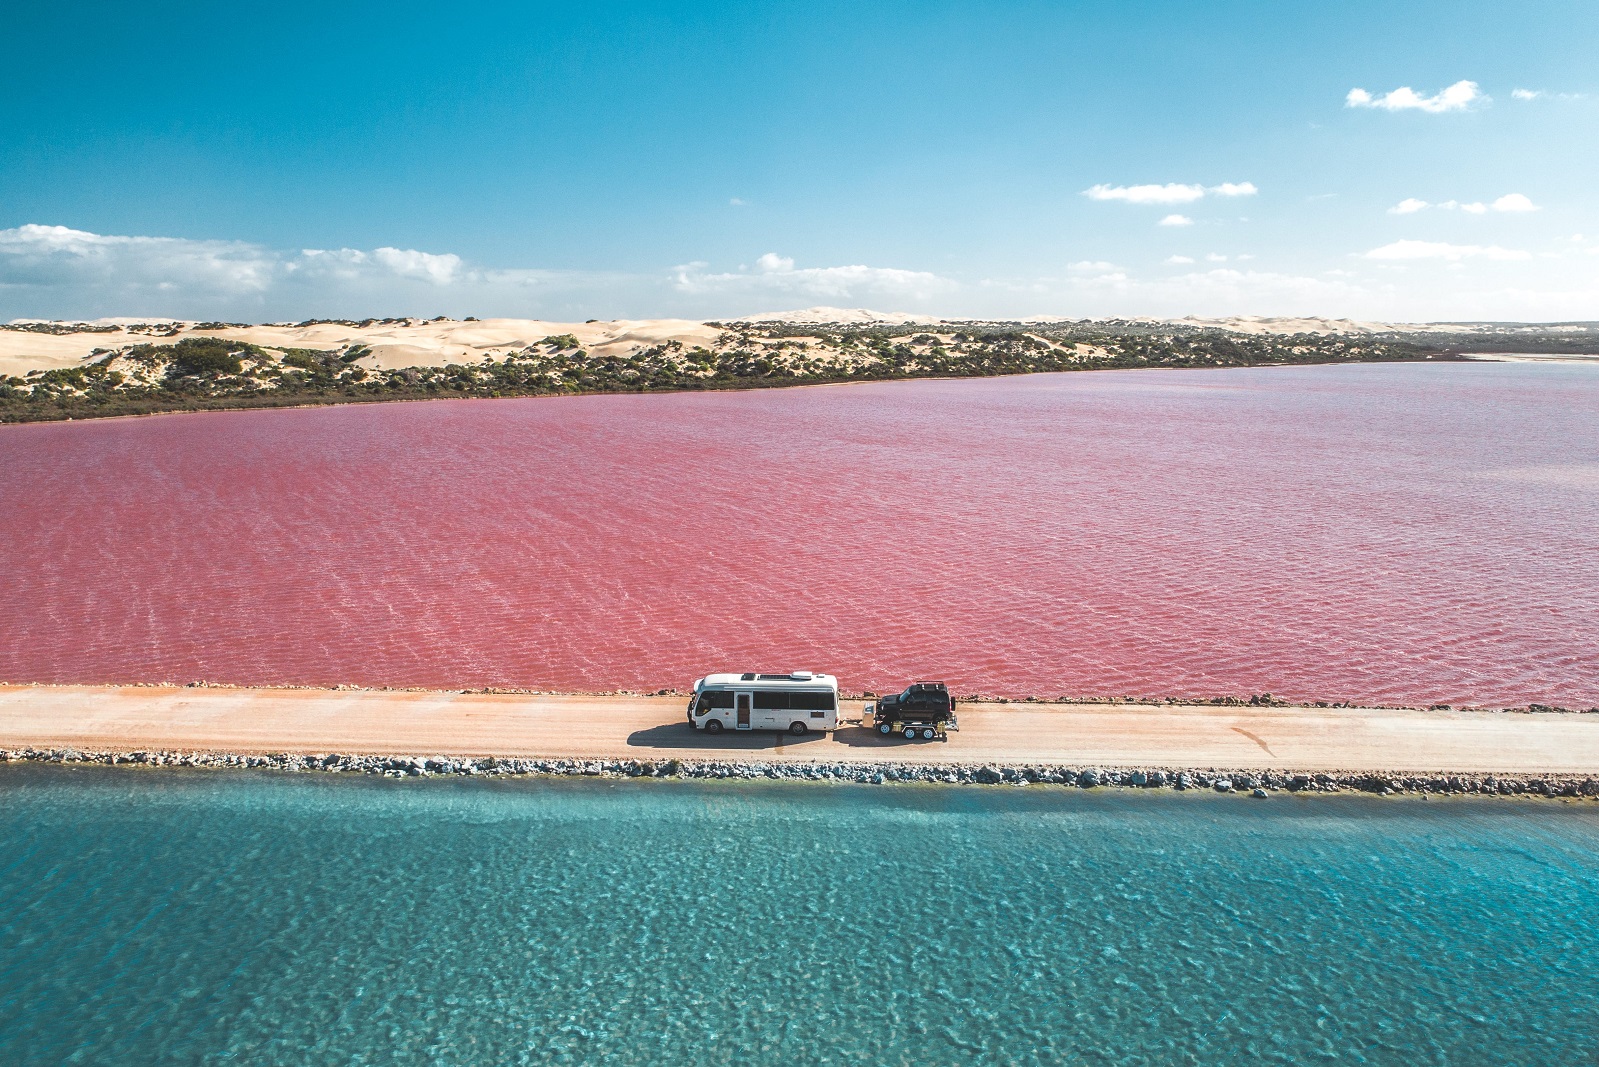 A white tour bus drives past the Pink Lake on South Australia's Eyre Peninsula. It is a bright, sunny day with the dazzling pink waters of the lake, sparkling in the sunshine.